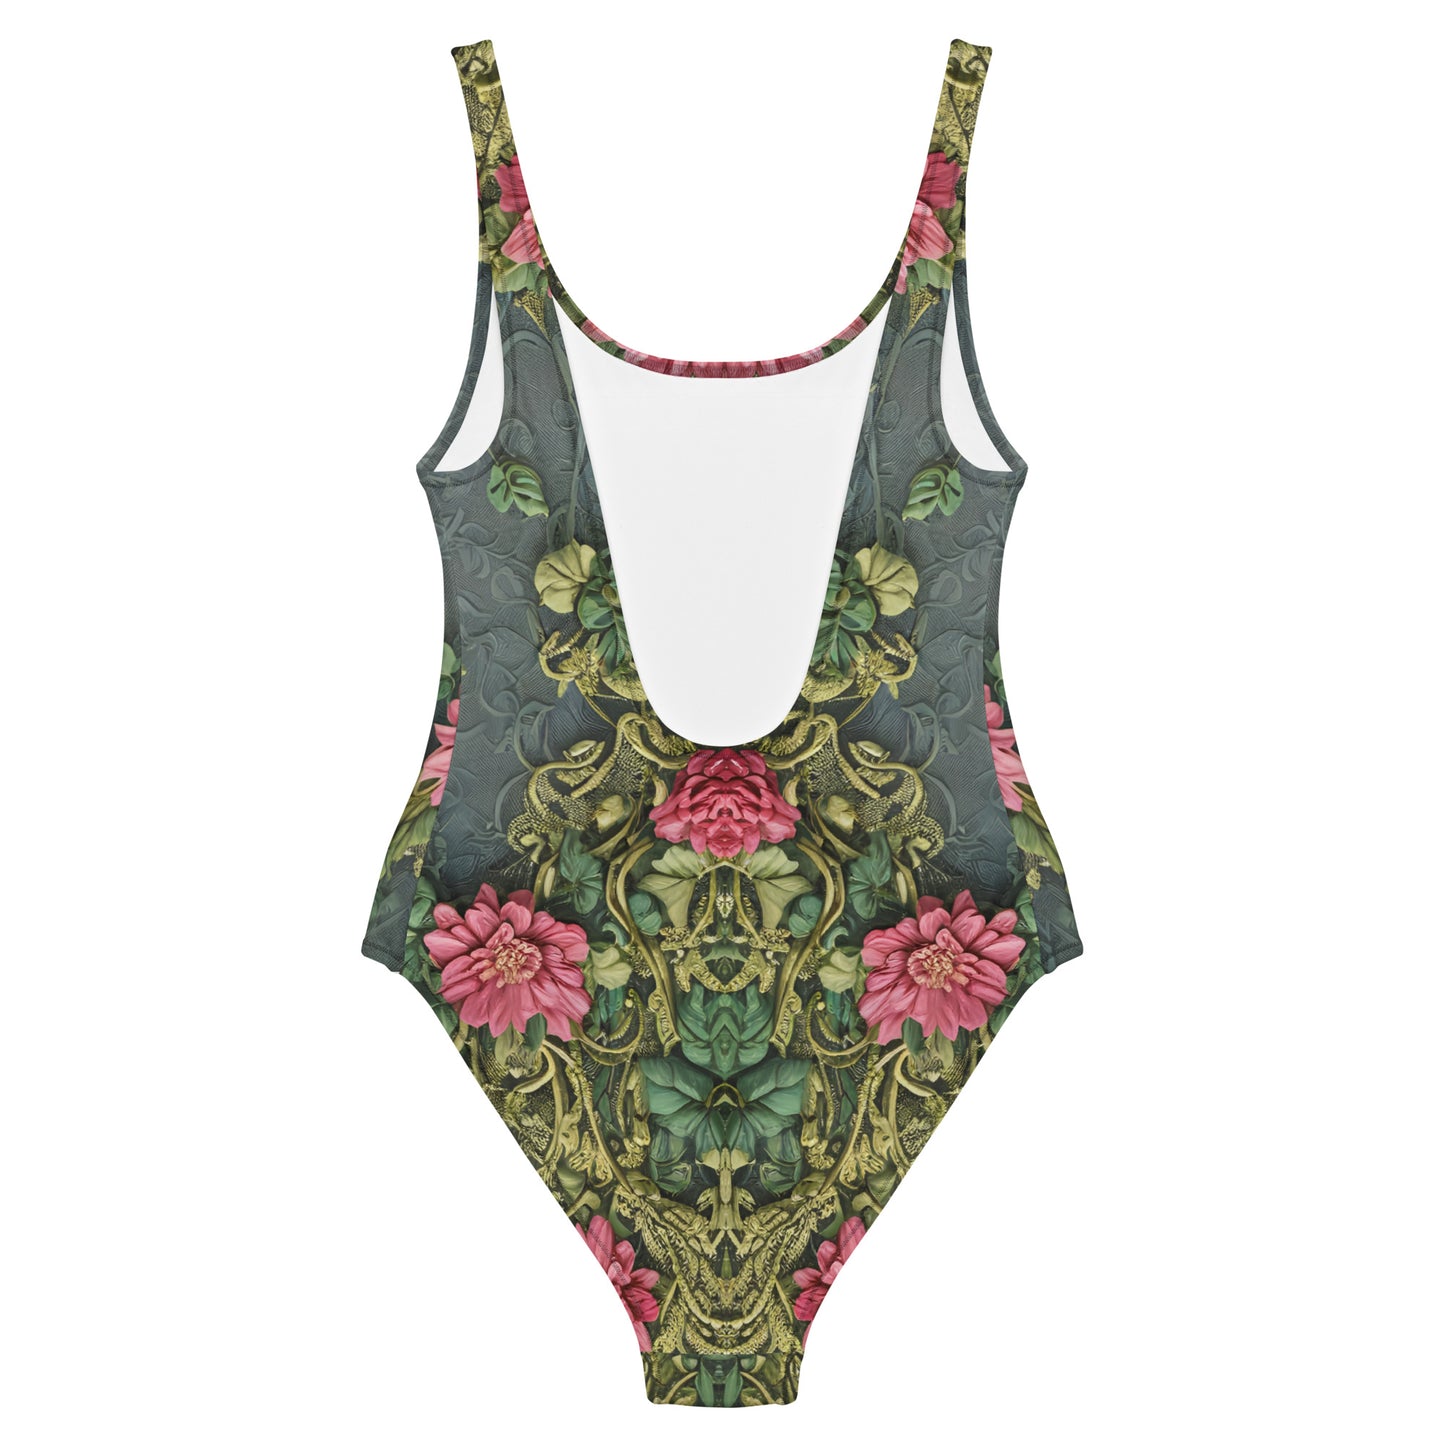 Ancient Roses One-Piece Swimsuit